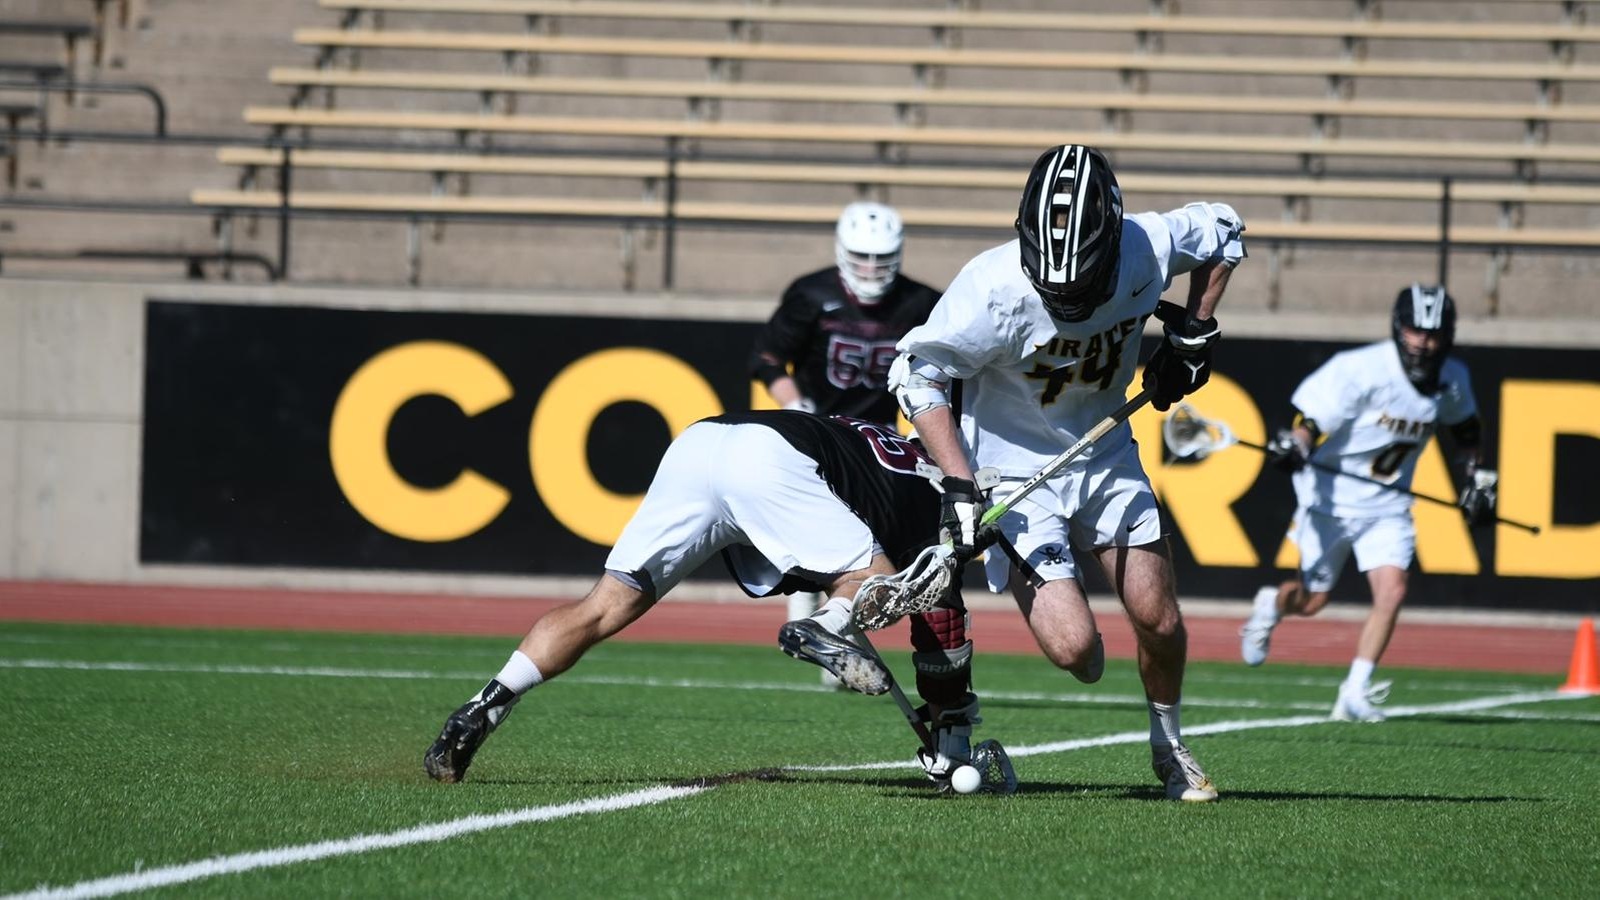 Men's Lacrosse Defeats Centenary To Advance To SCAC Championship Game